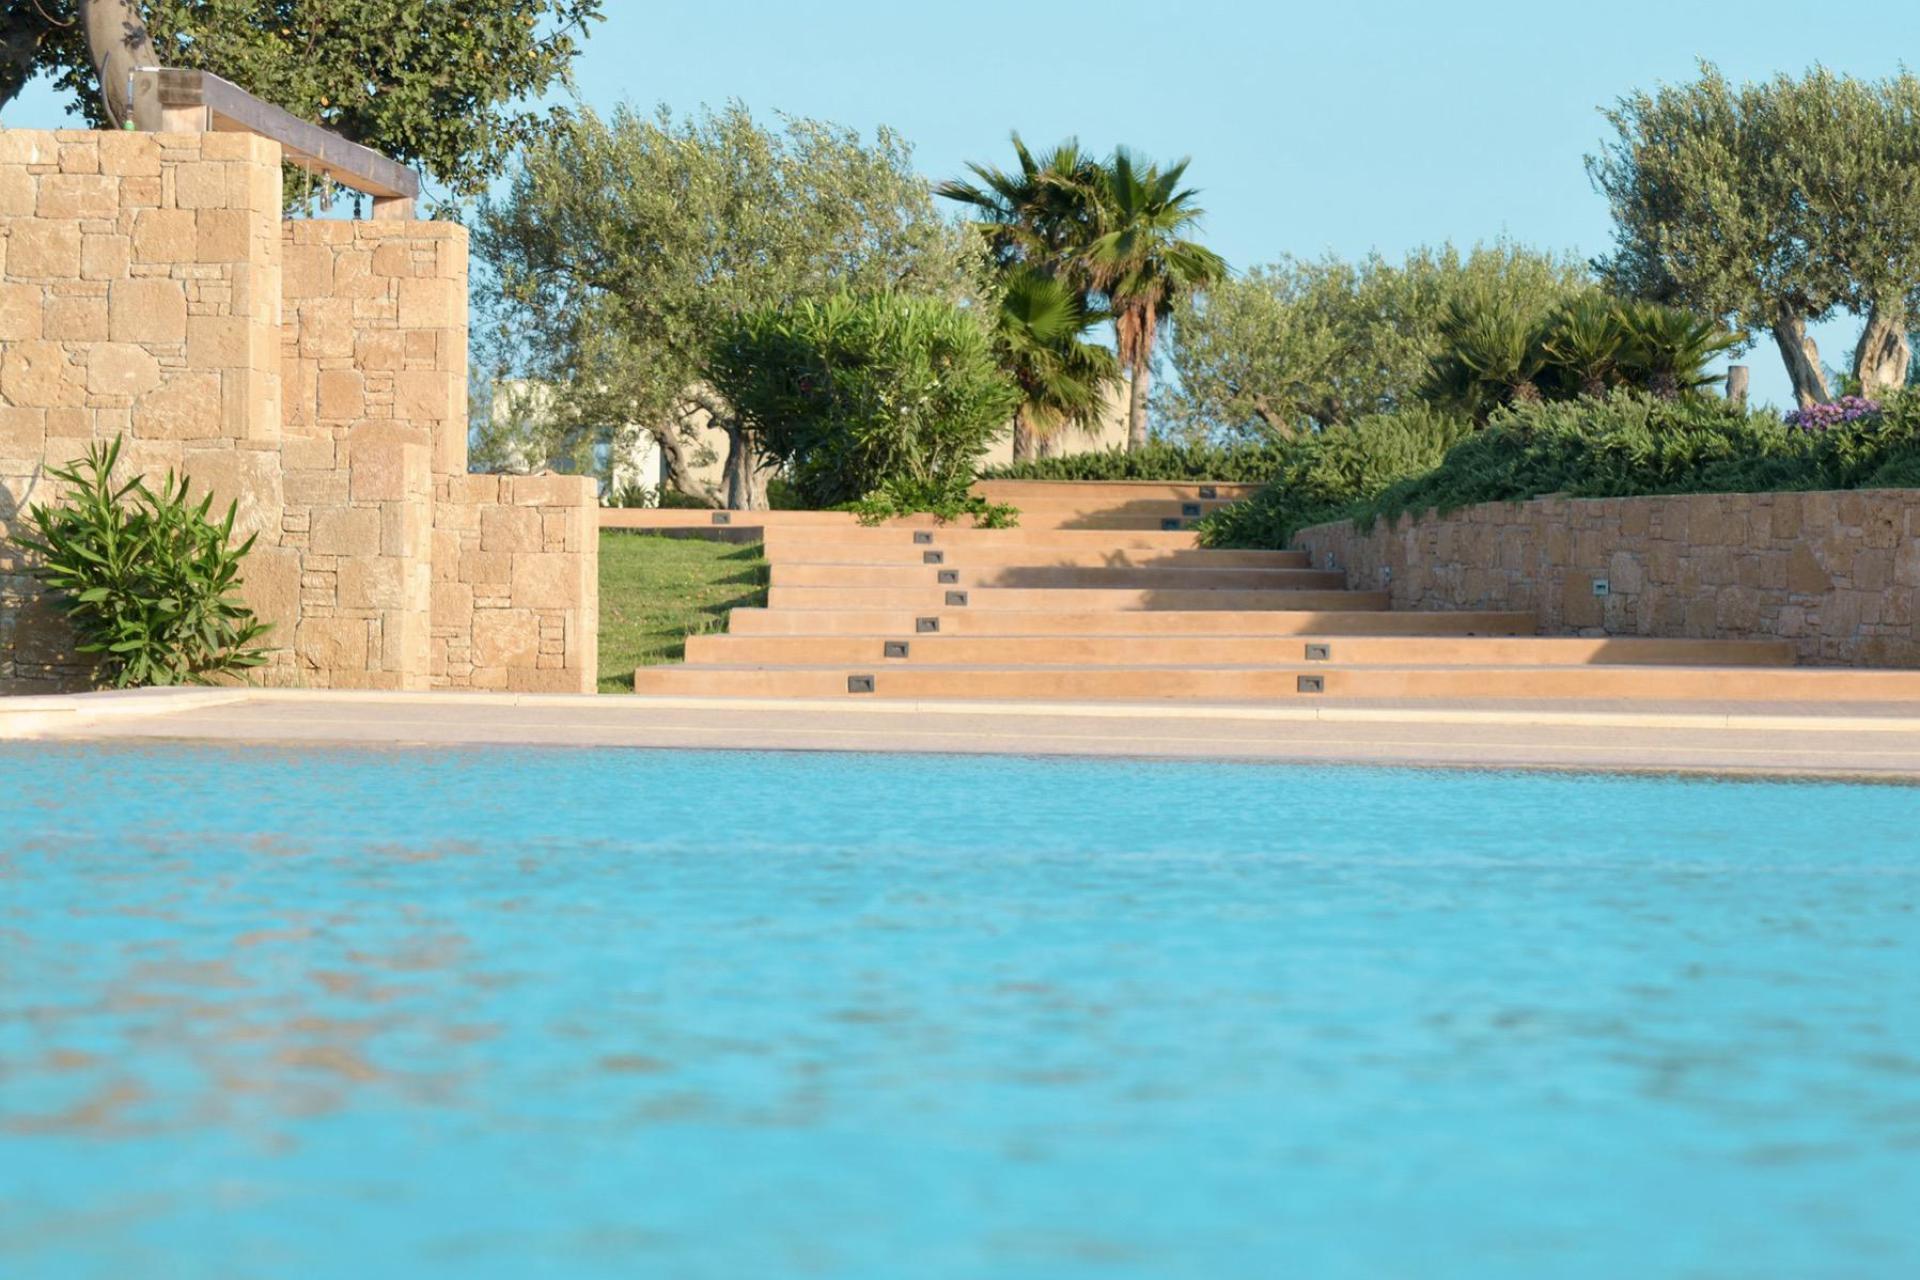 Luxury agriturismo for beach lovers in Sicily